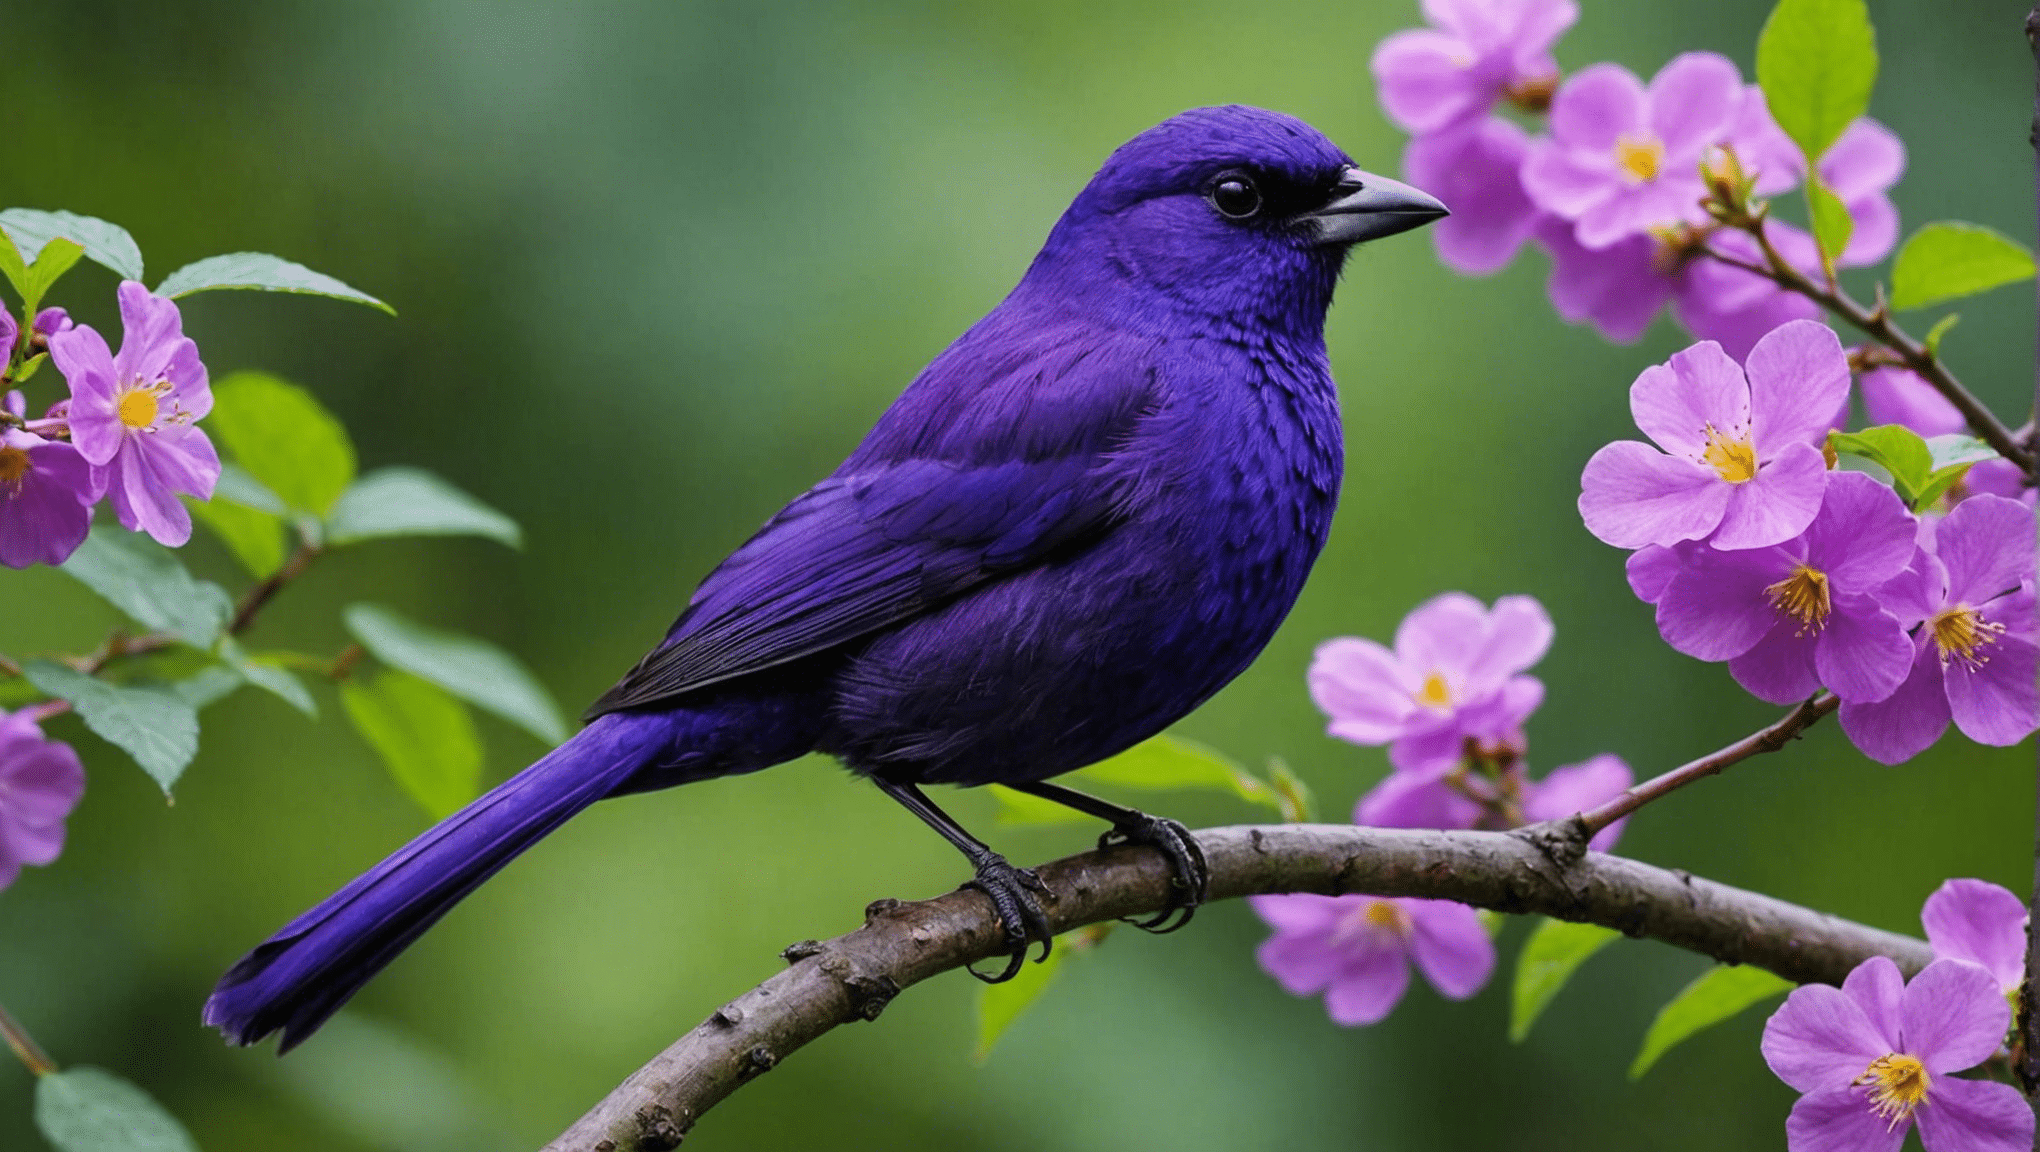 discover whether purple birds are rare in this informative article on avian species and their unique colorations.